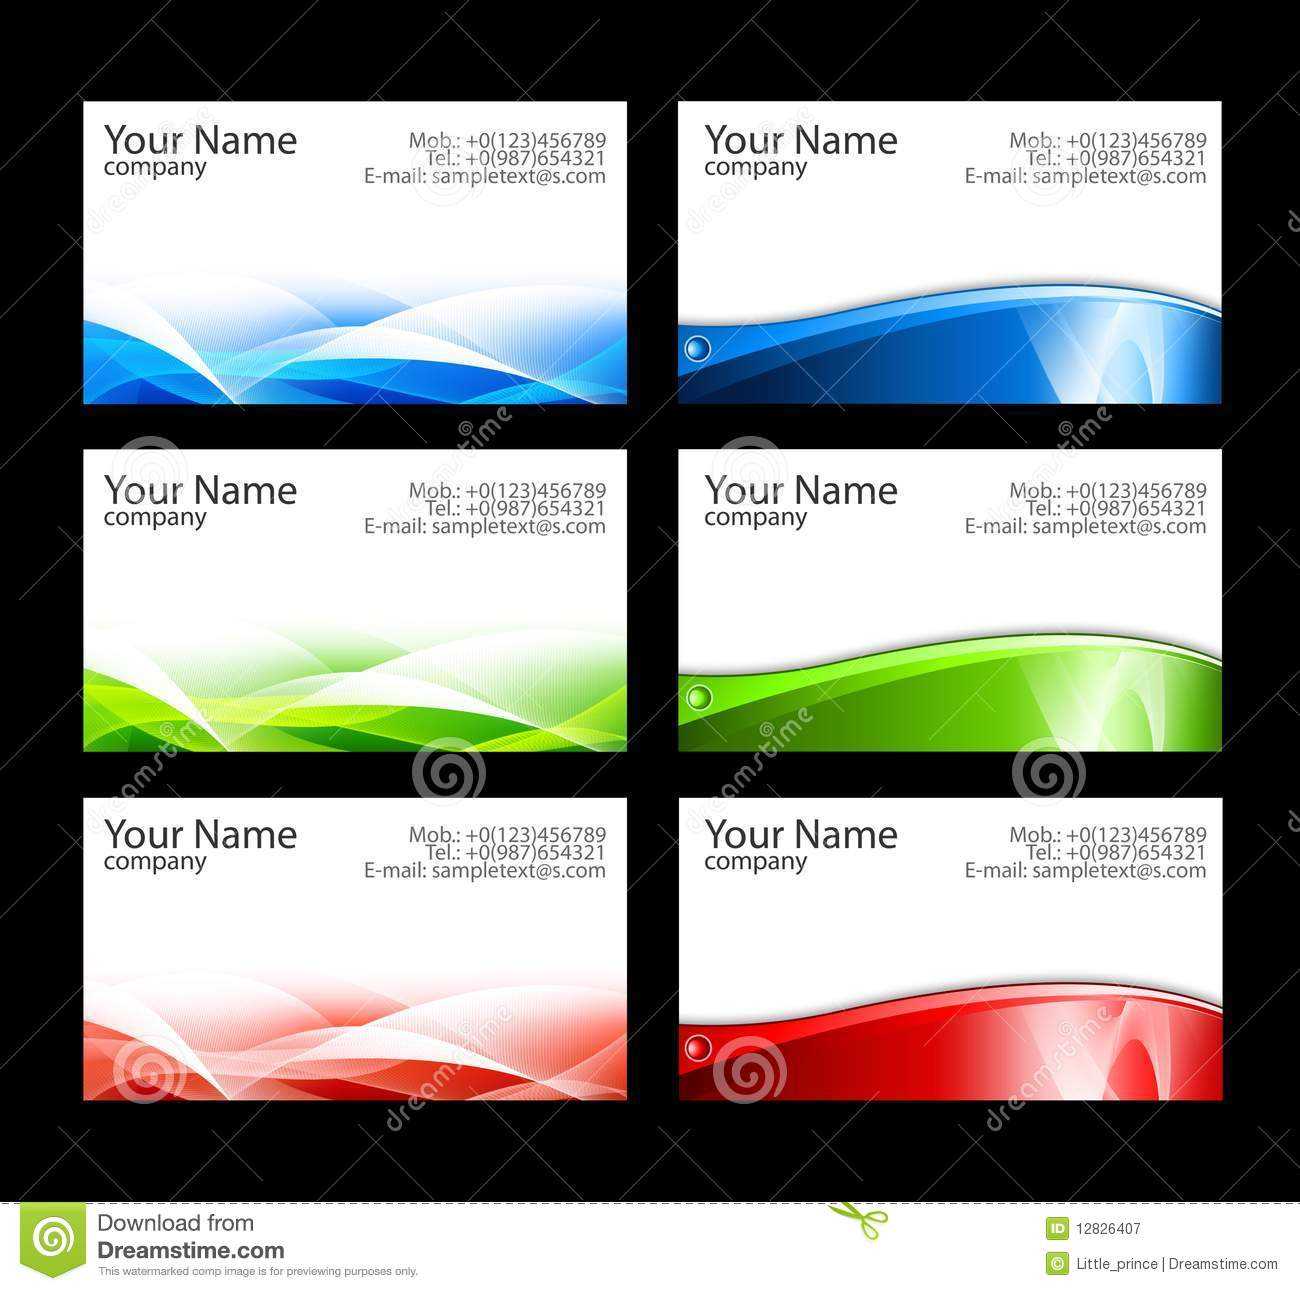 Business Cards Templates Stock Illustration. Illustration Of Intended For Free Template Business Cards To Print